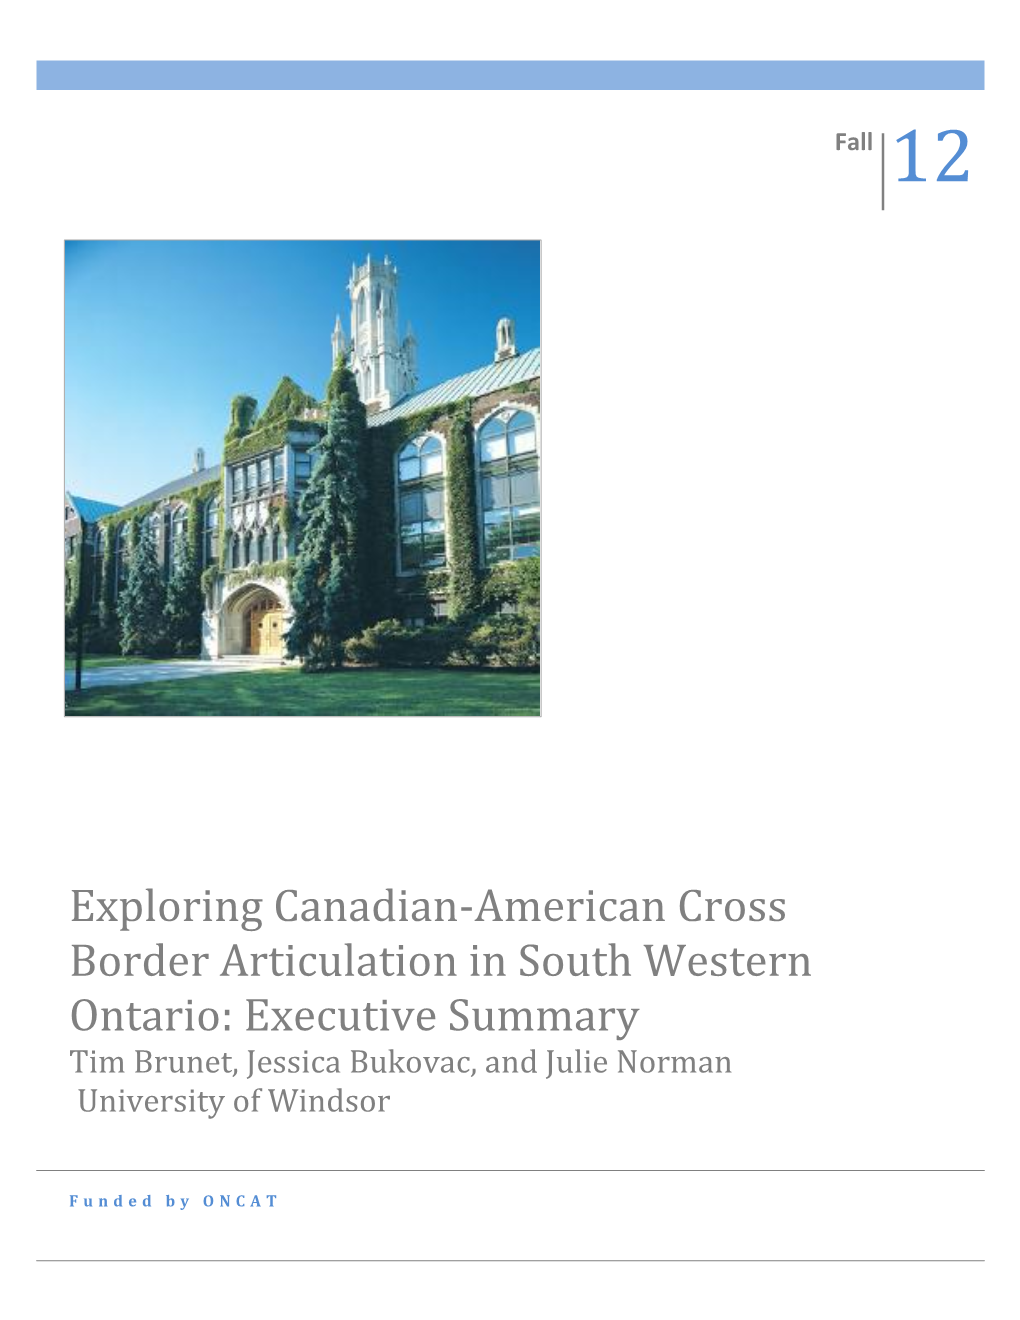 Exploring Canadian-American Cross Border Articulation in South Western Ontario: Executive Summary Tim Brunet, Jessica Bukovac, and Julie Norman University of Windsor